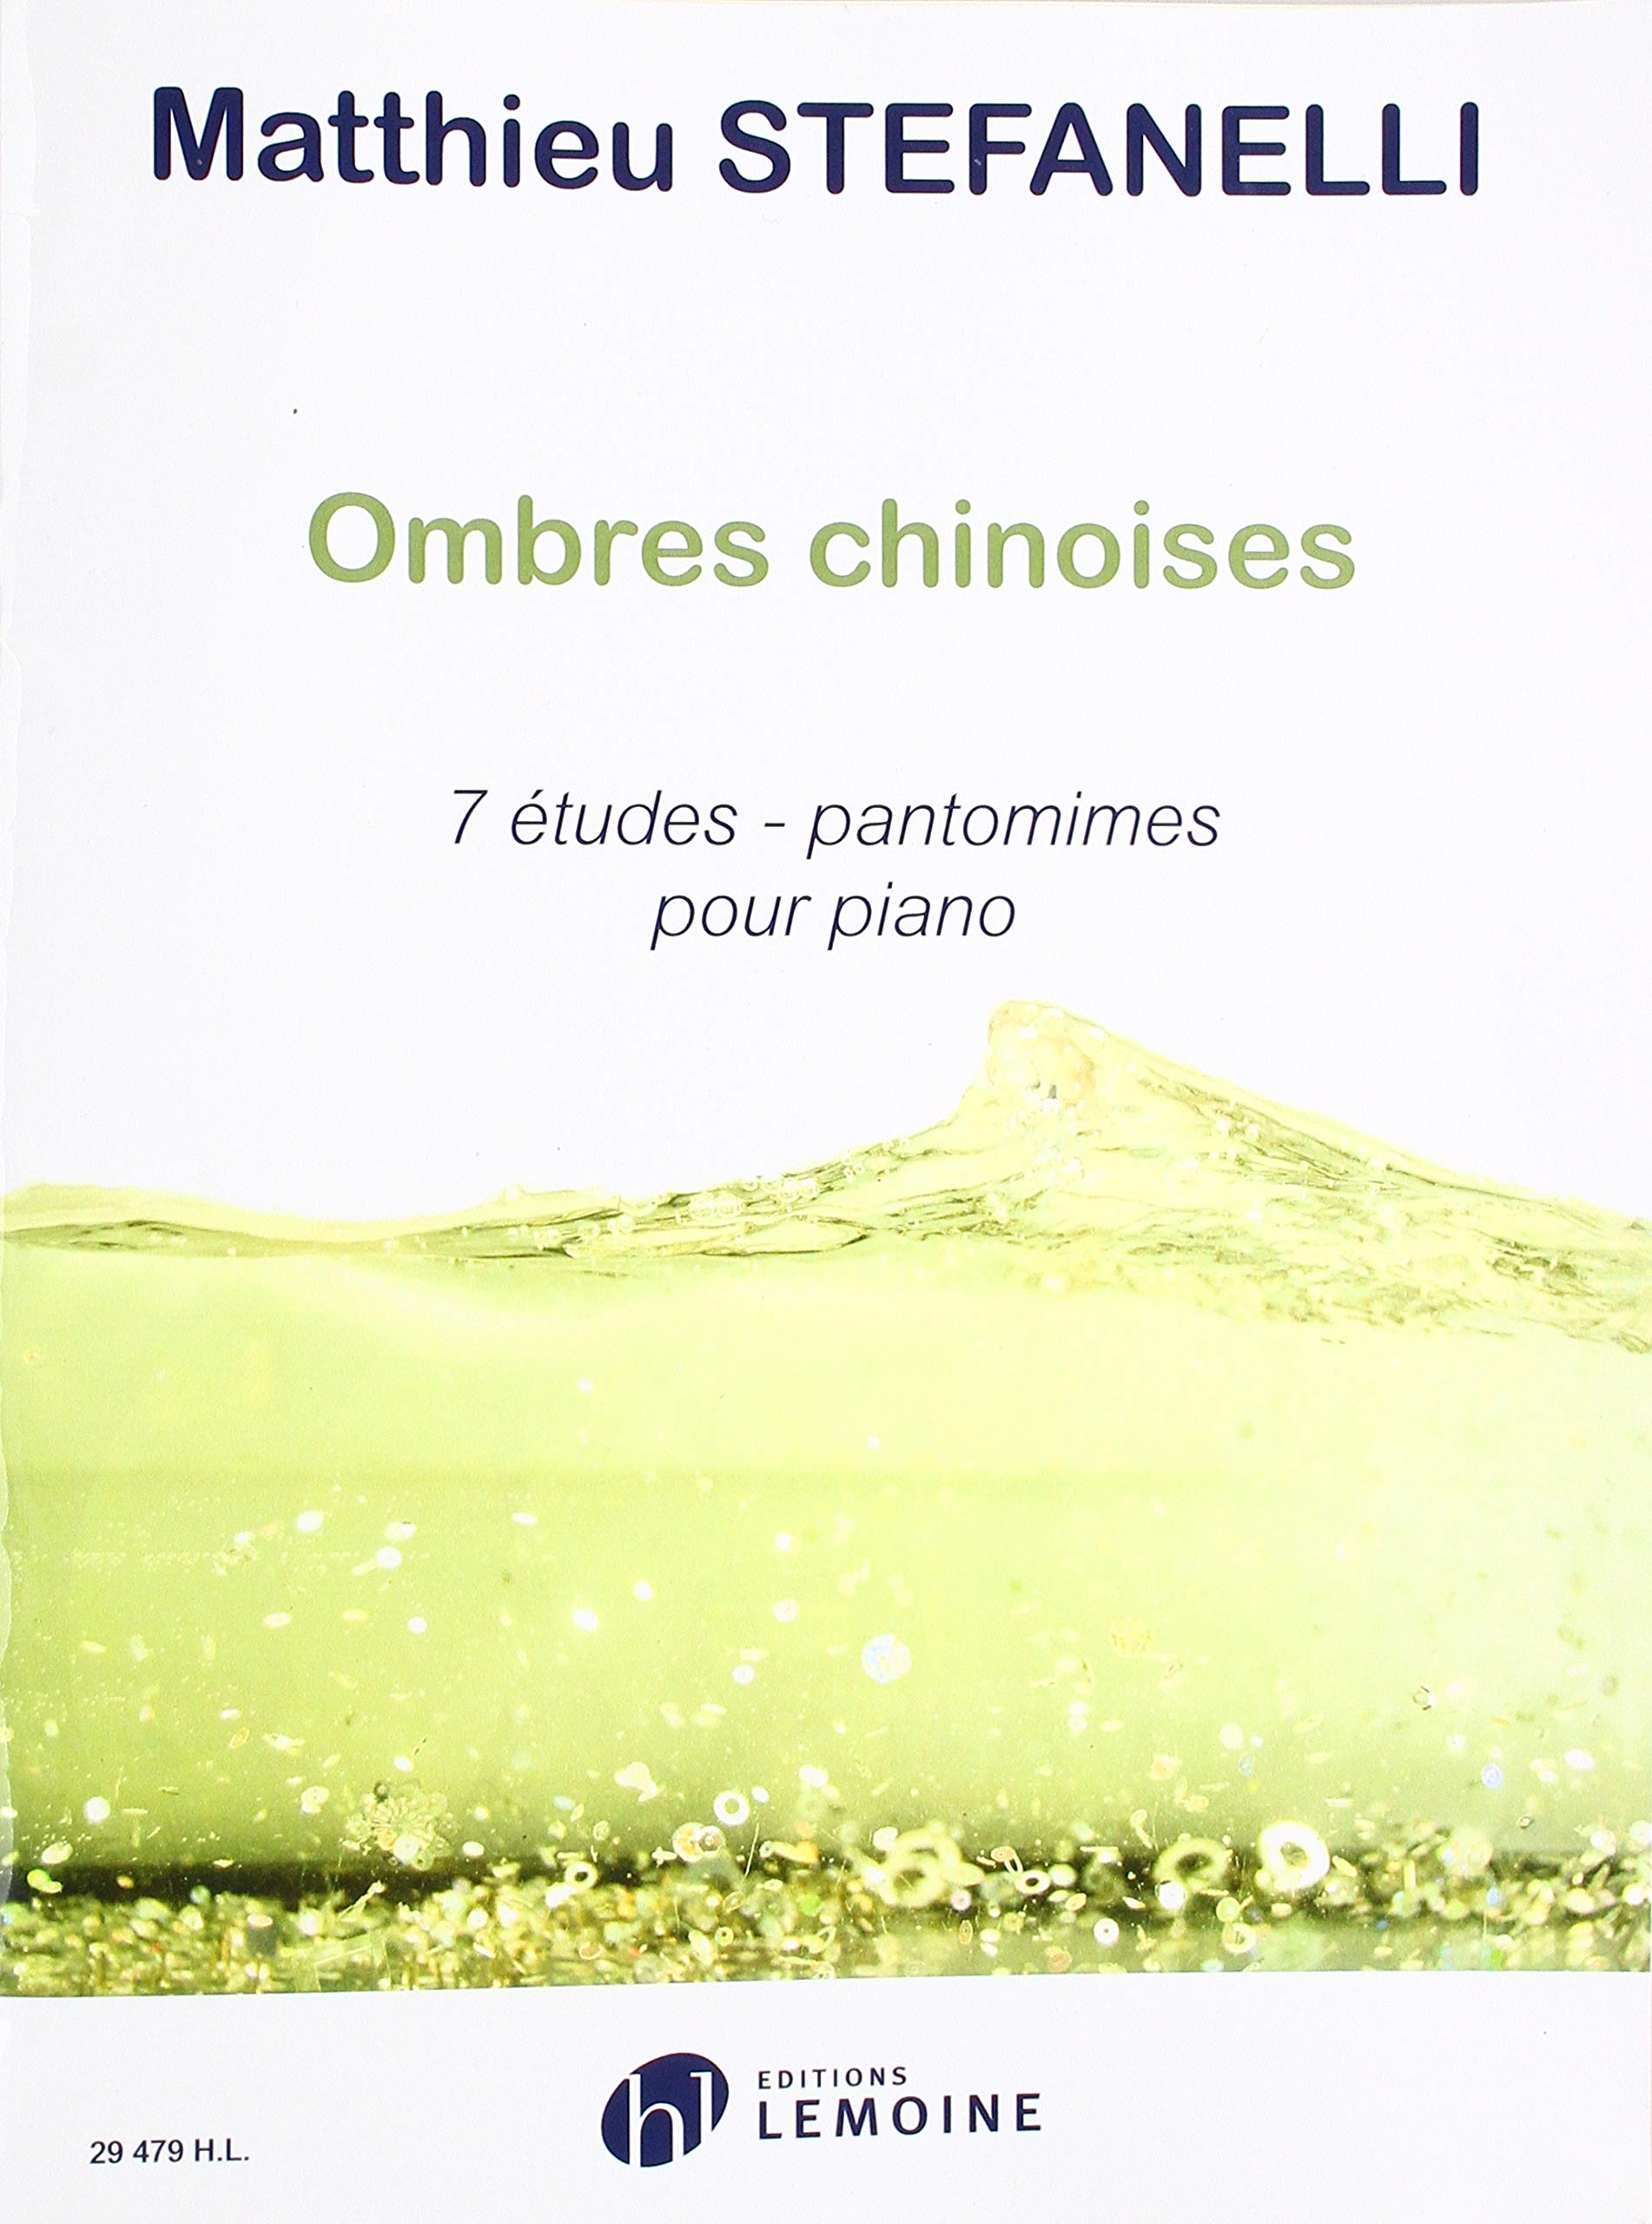 Stefanelli: Ombres chinoises